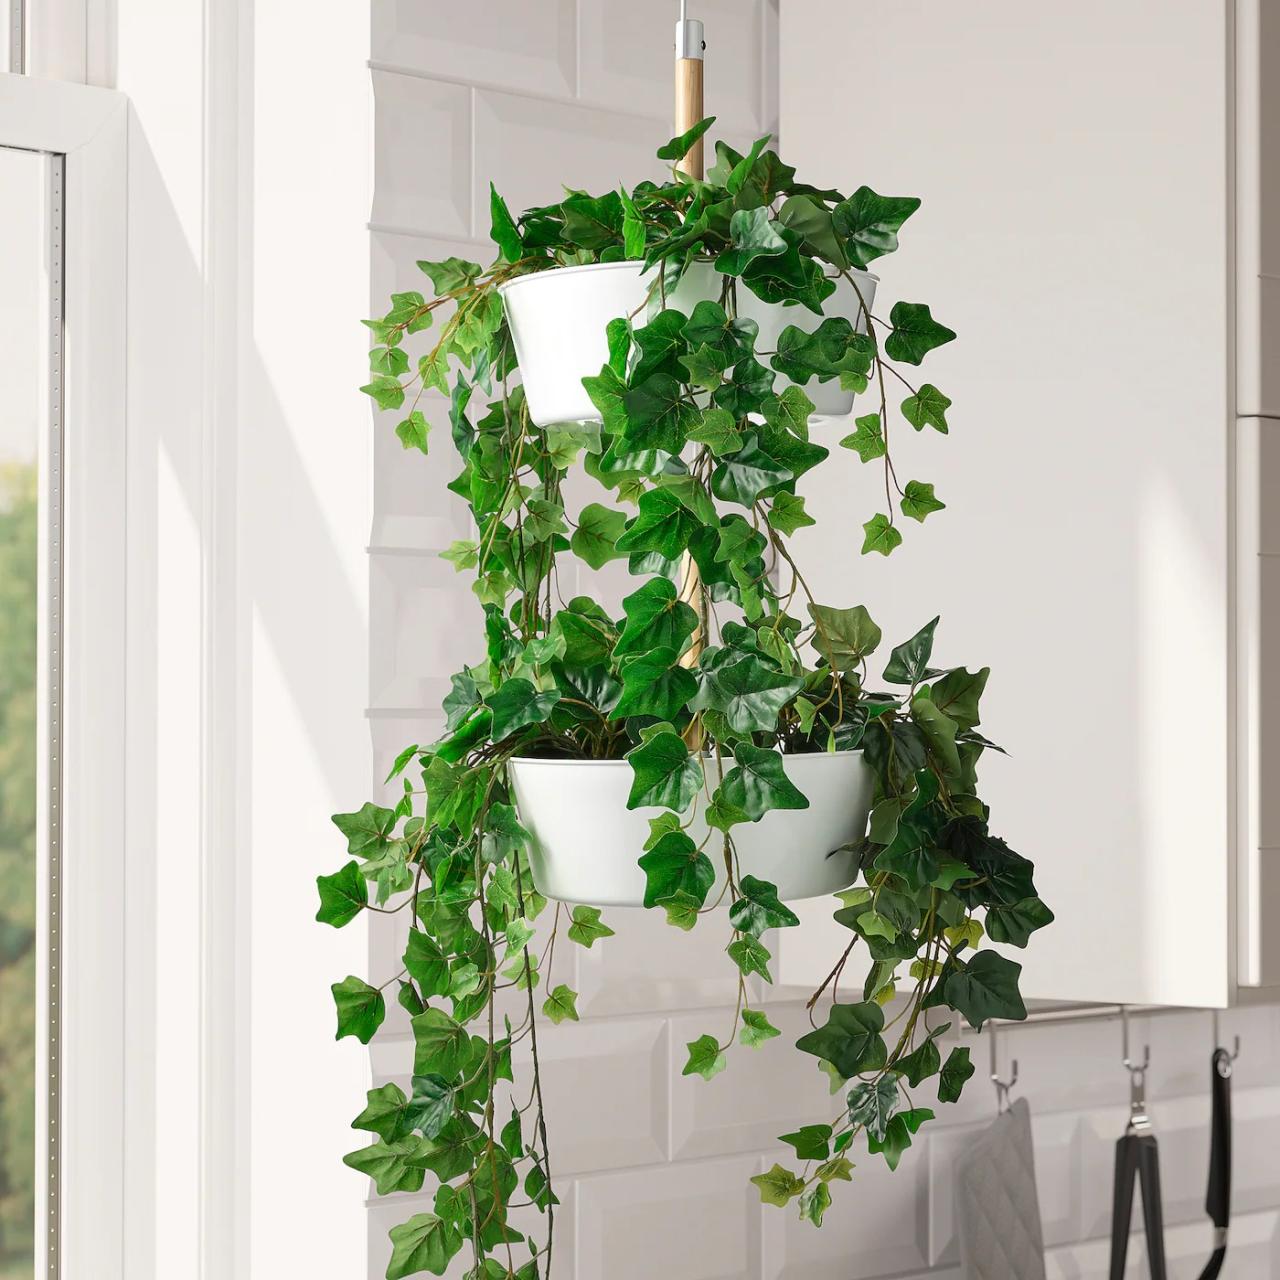 Hanging Plants Indoor | Fake Hanging Indoor Plants: A Guide to Artificial Greenery